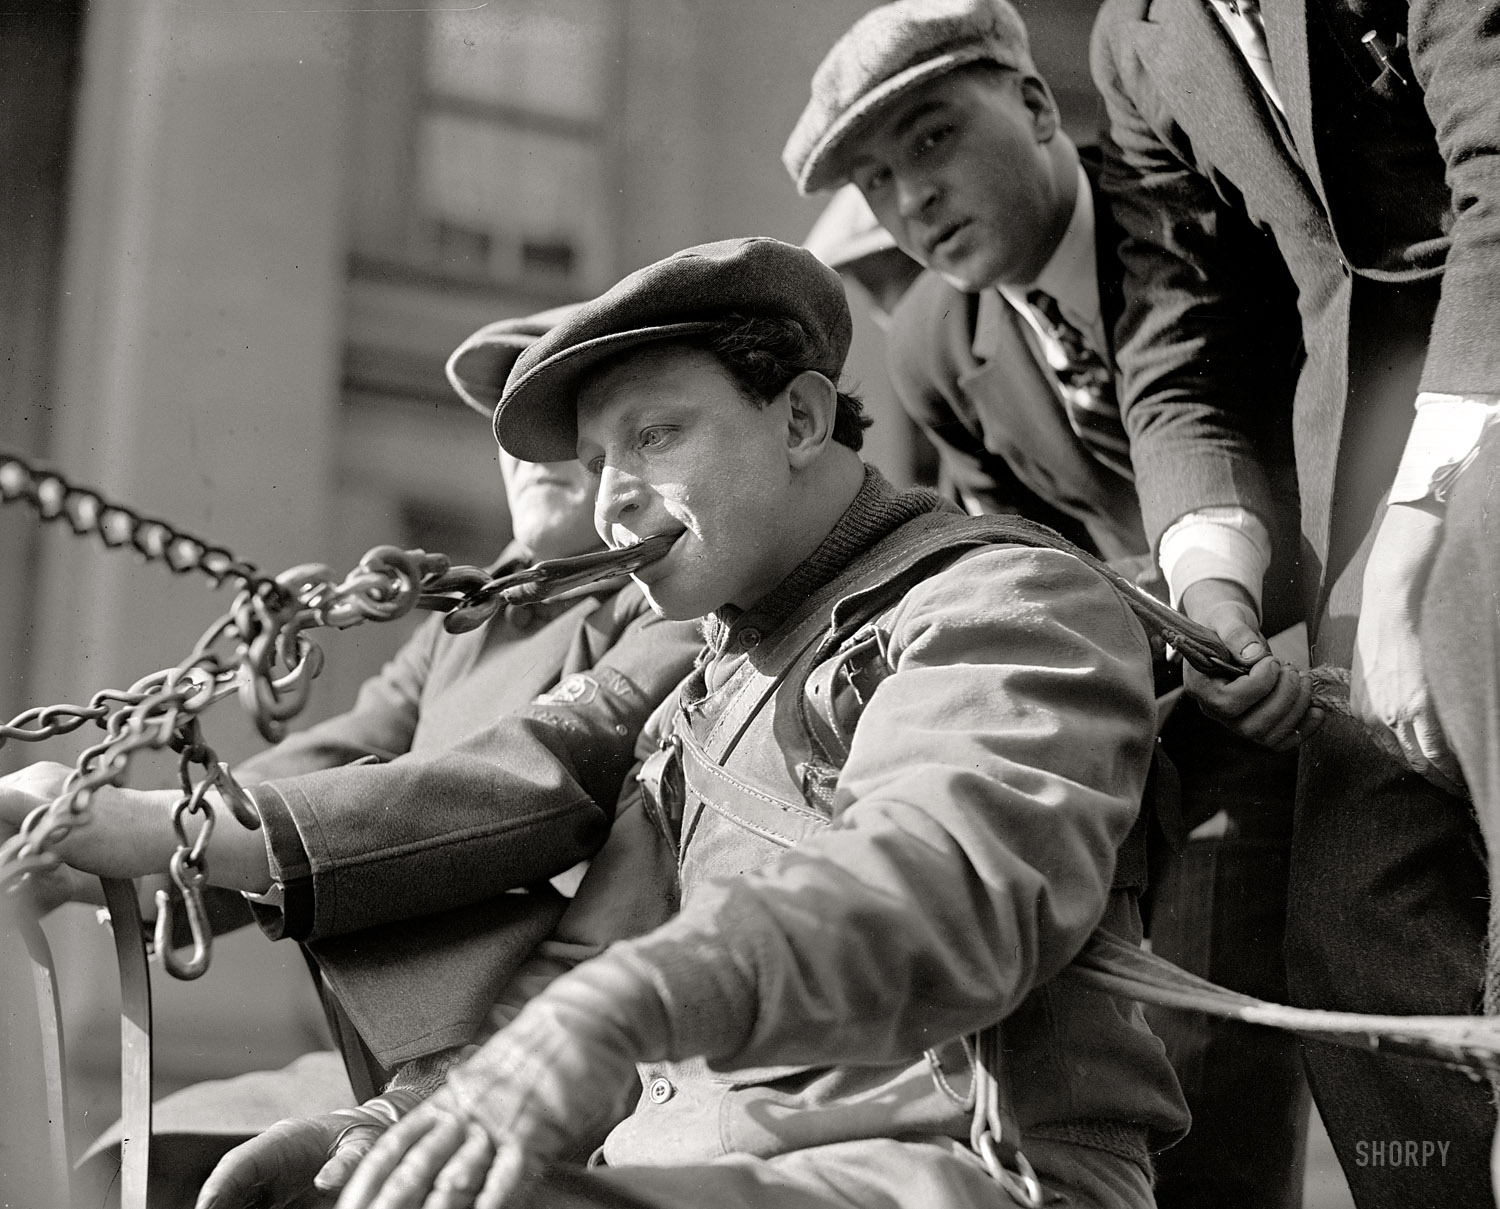 "Untitled -- November 27, 1923." Who can figure out what's going on here? National Photo Company Collection glass negative. View full size.
Update: Stanton Square rides to the rescue with the answer: It's the vaudeville strongman Zishe Breitbart, who was something of a legend in his own time.